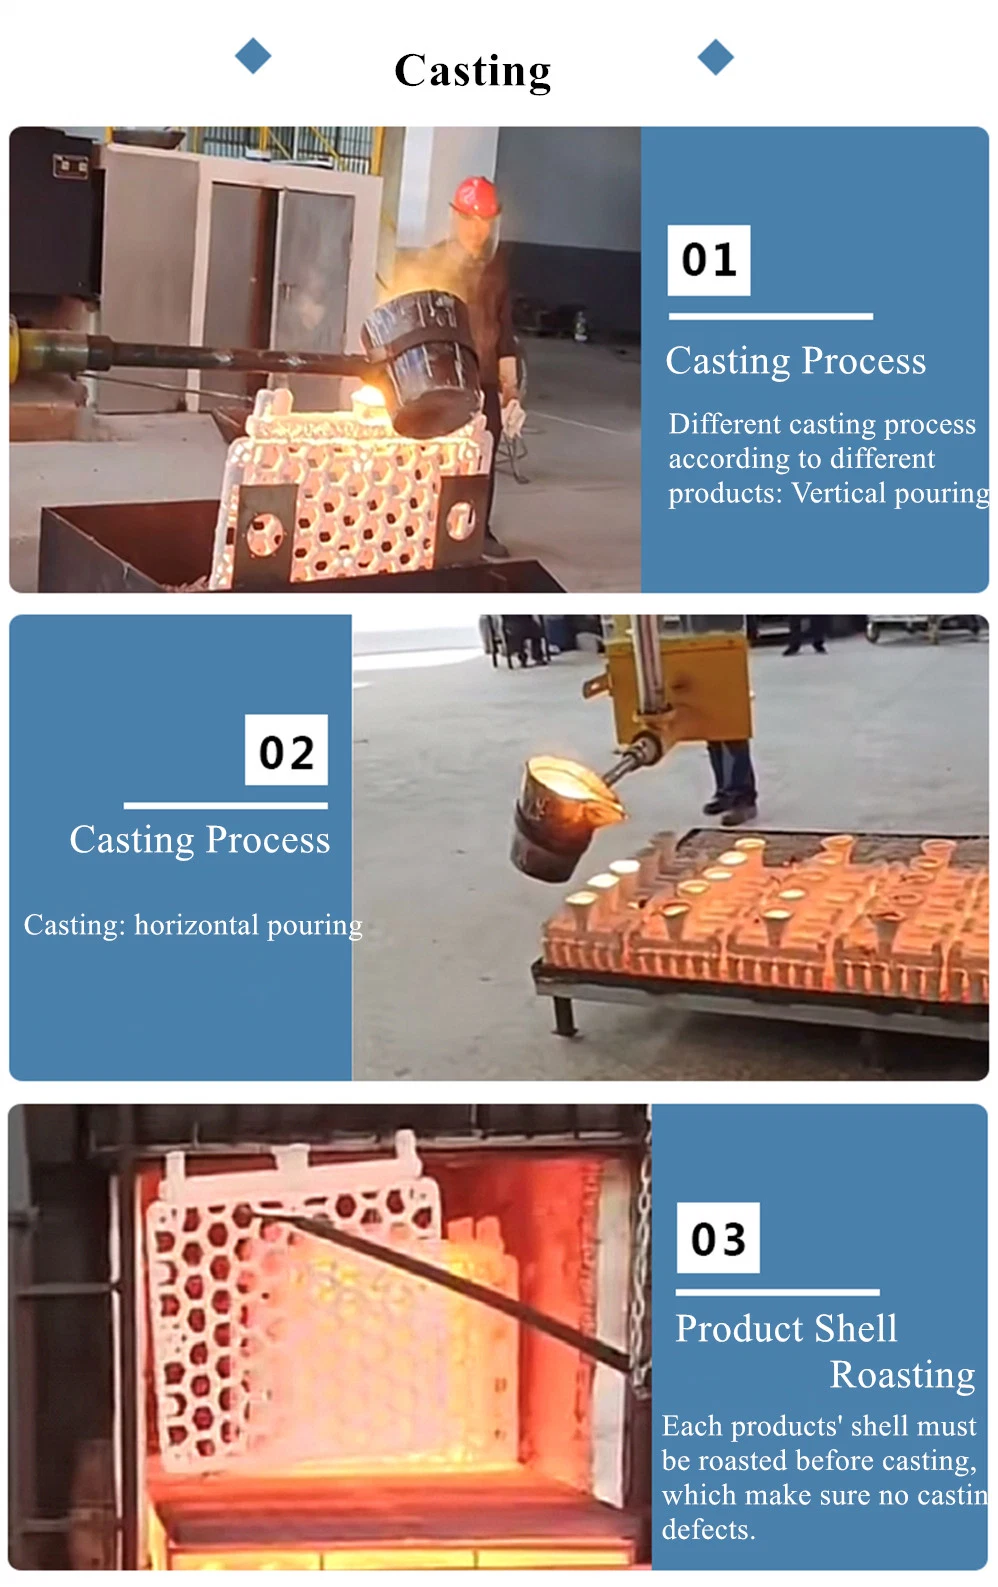 Industrial Furnace Spare Parts: Fixtures, Baskets, Slide Riders etc Made of Heat Resistant Steel Castings